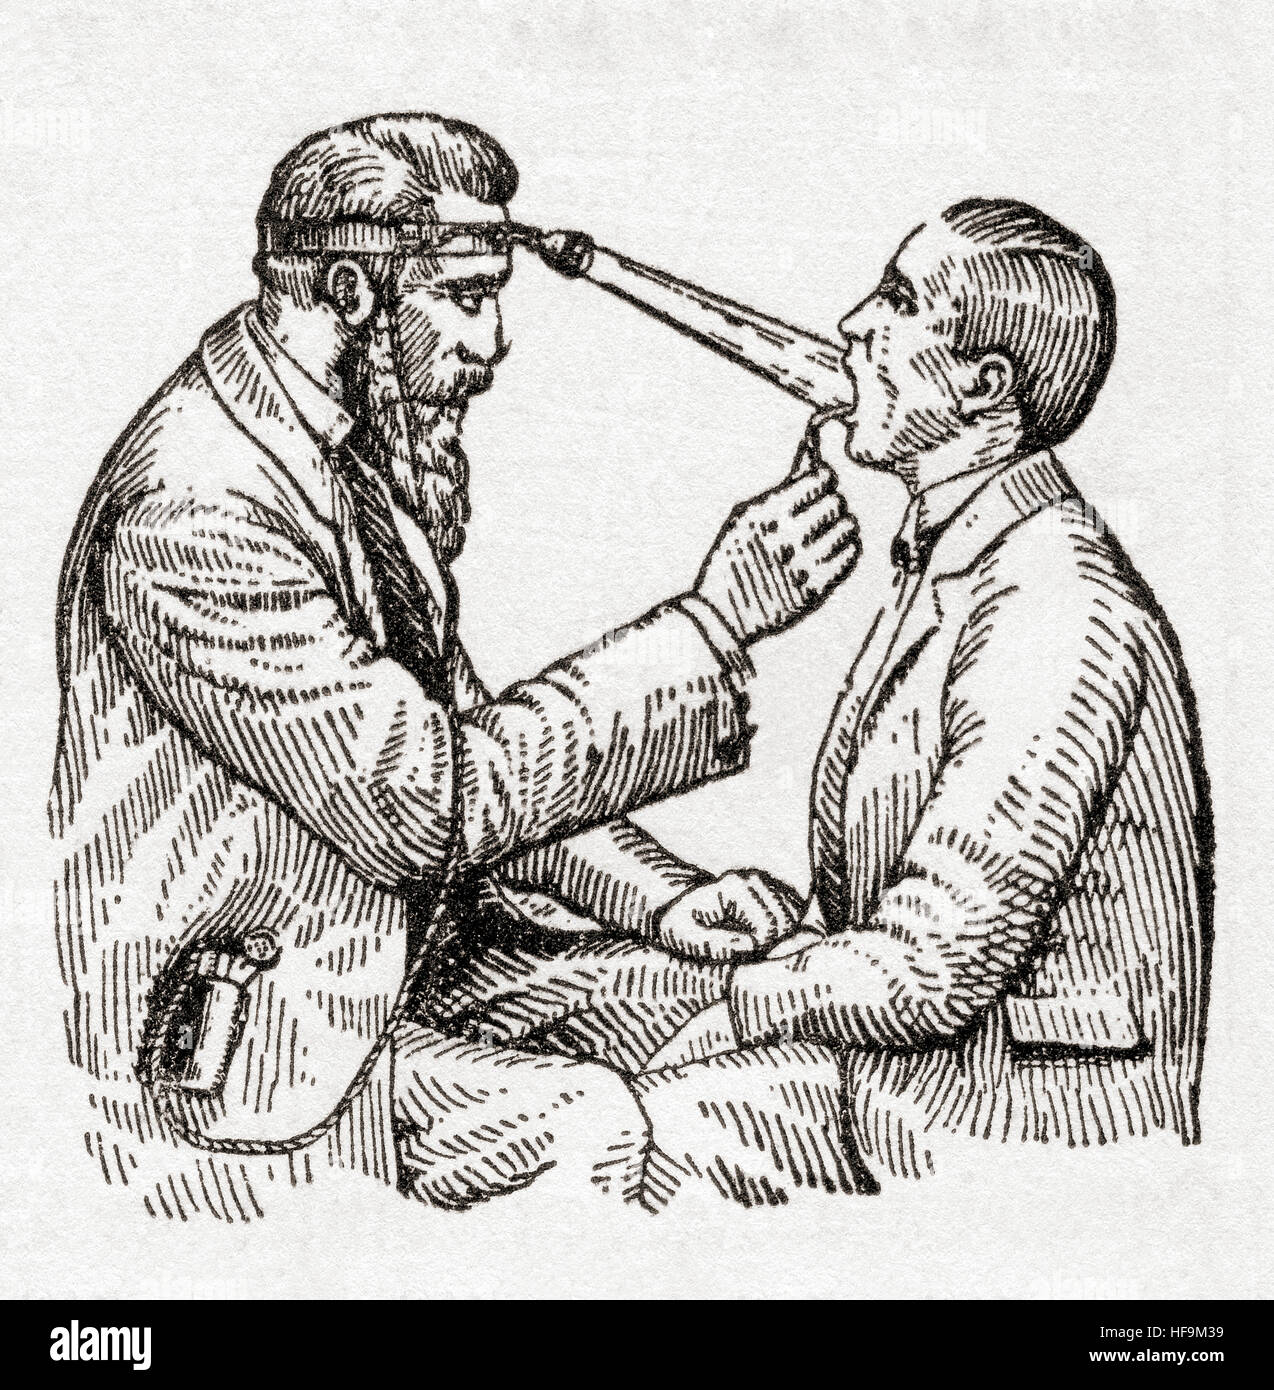 A doctor in the19th century using medical lighting equipment worn on his head to examine a patient's throat.  From Meyers Lexicon, published 1924. Stock Photo